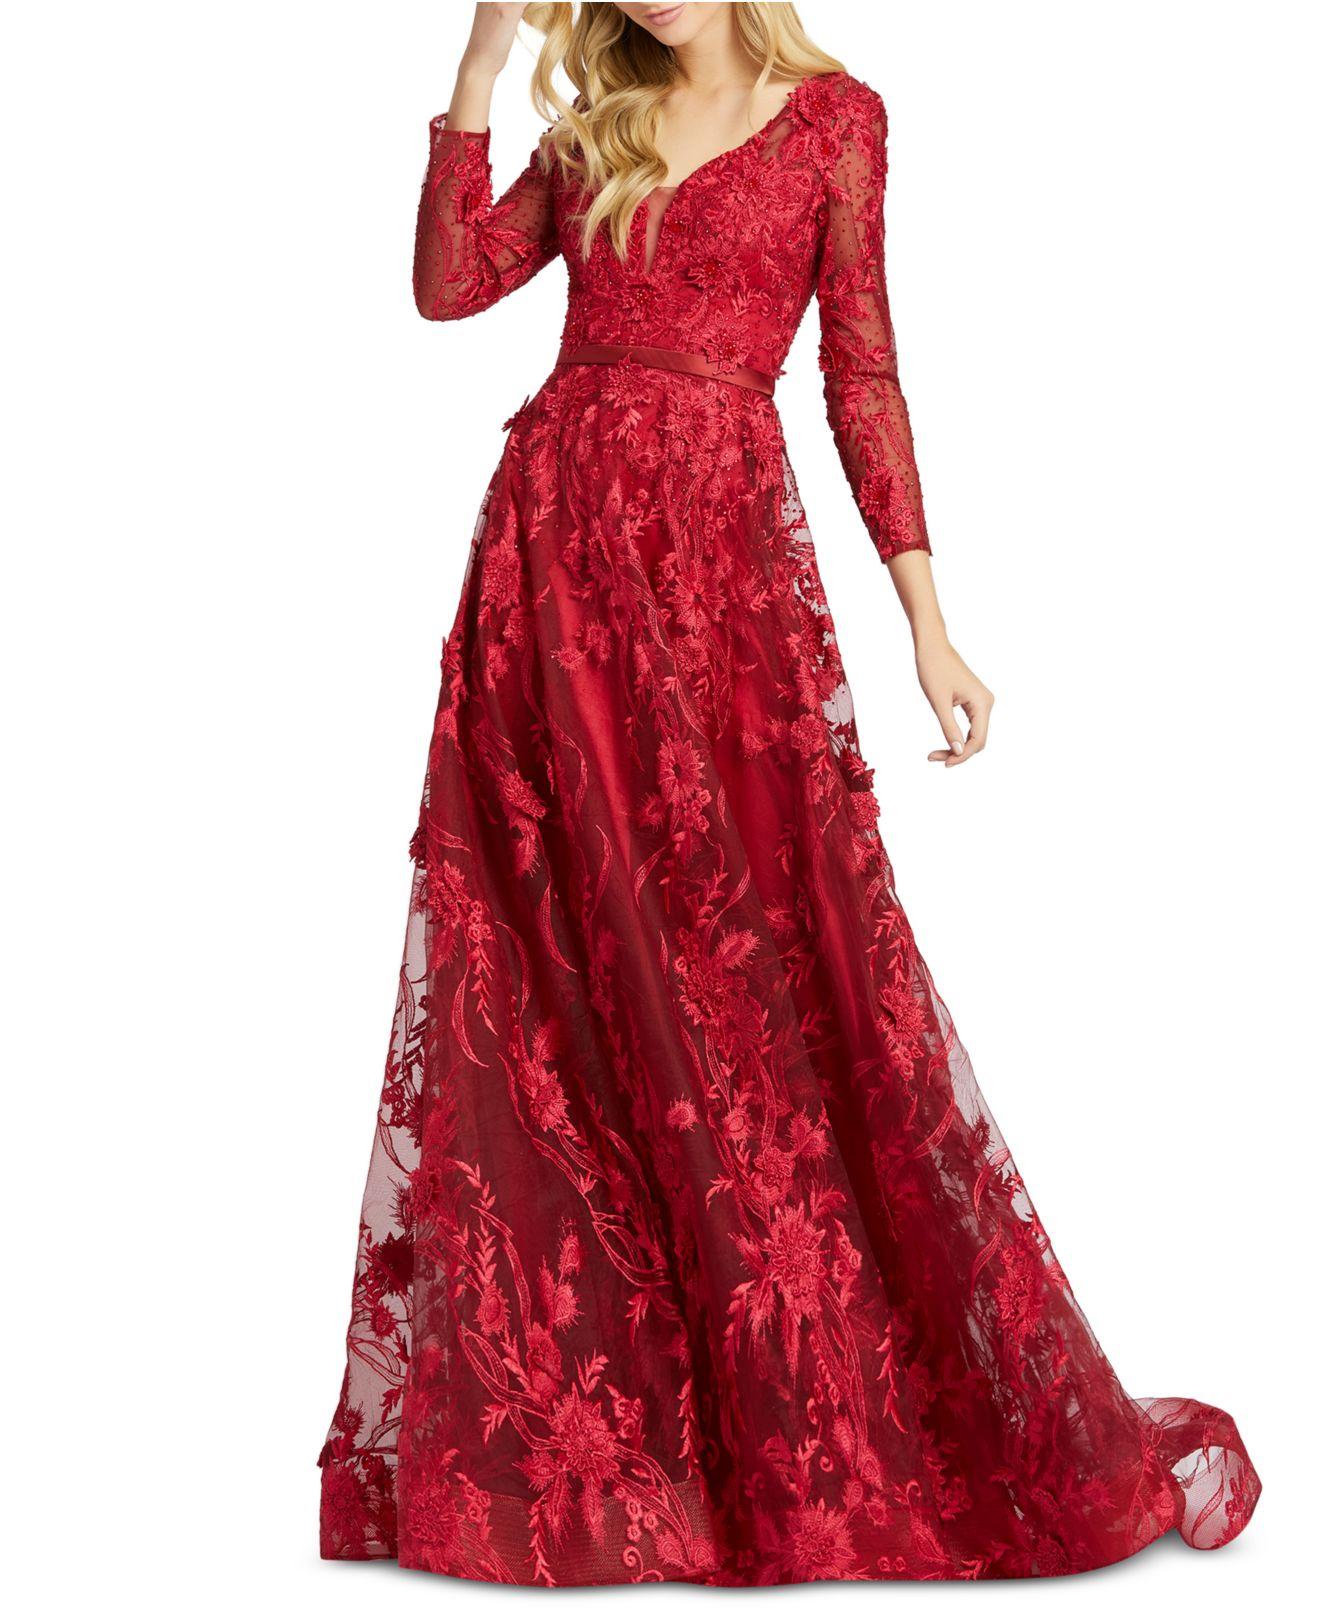 Mac Duggal Synthetic Embellished Floral-appliqué Gown in Deep Red (Red